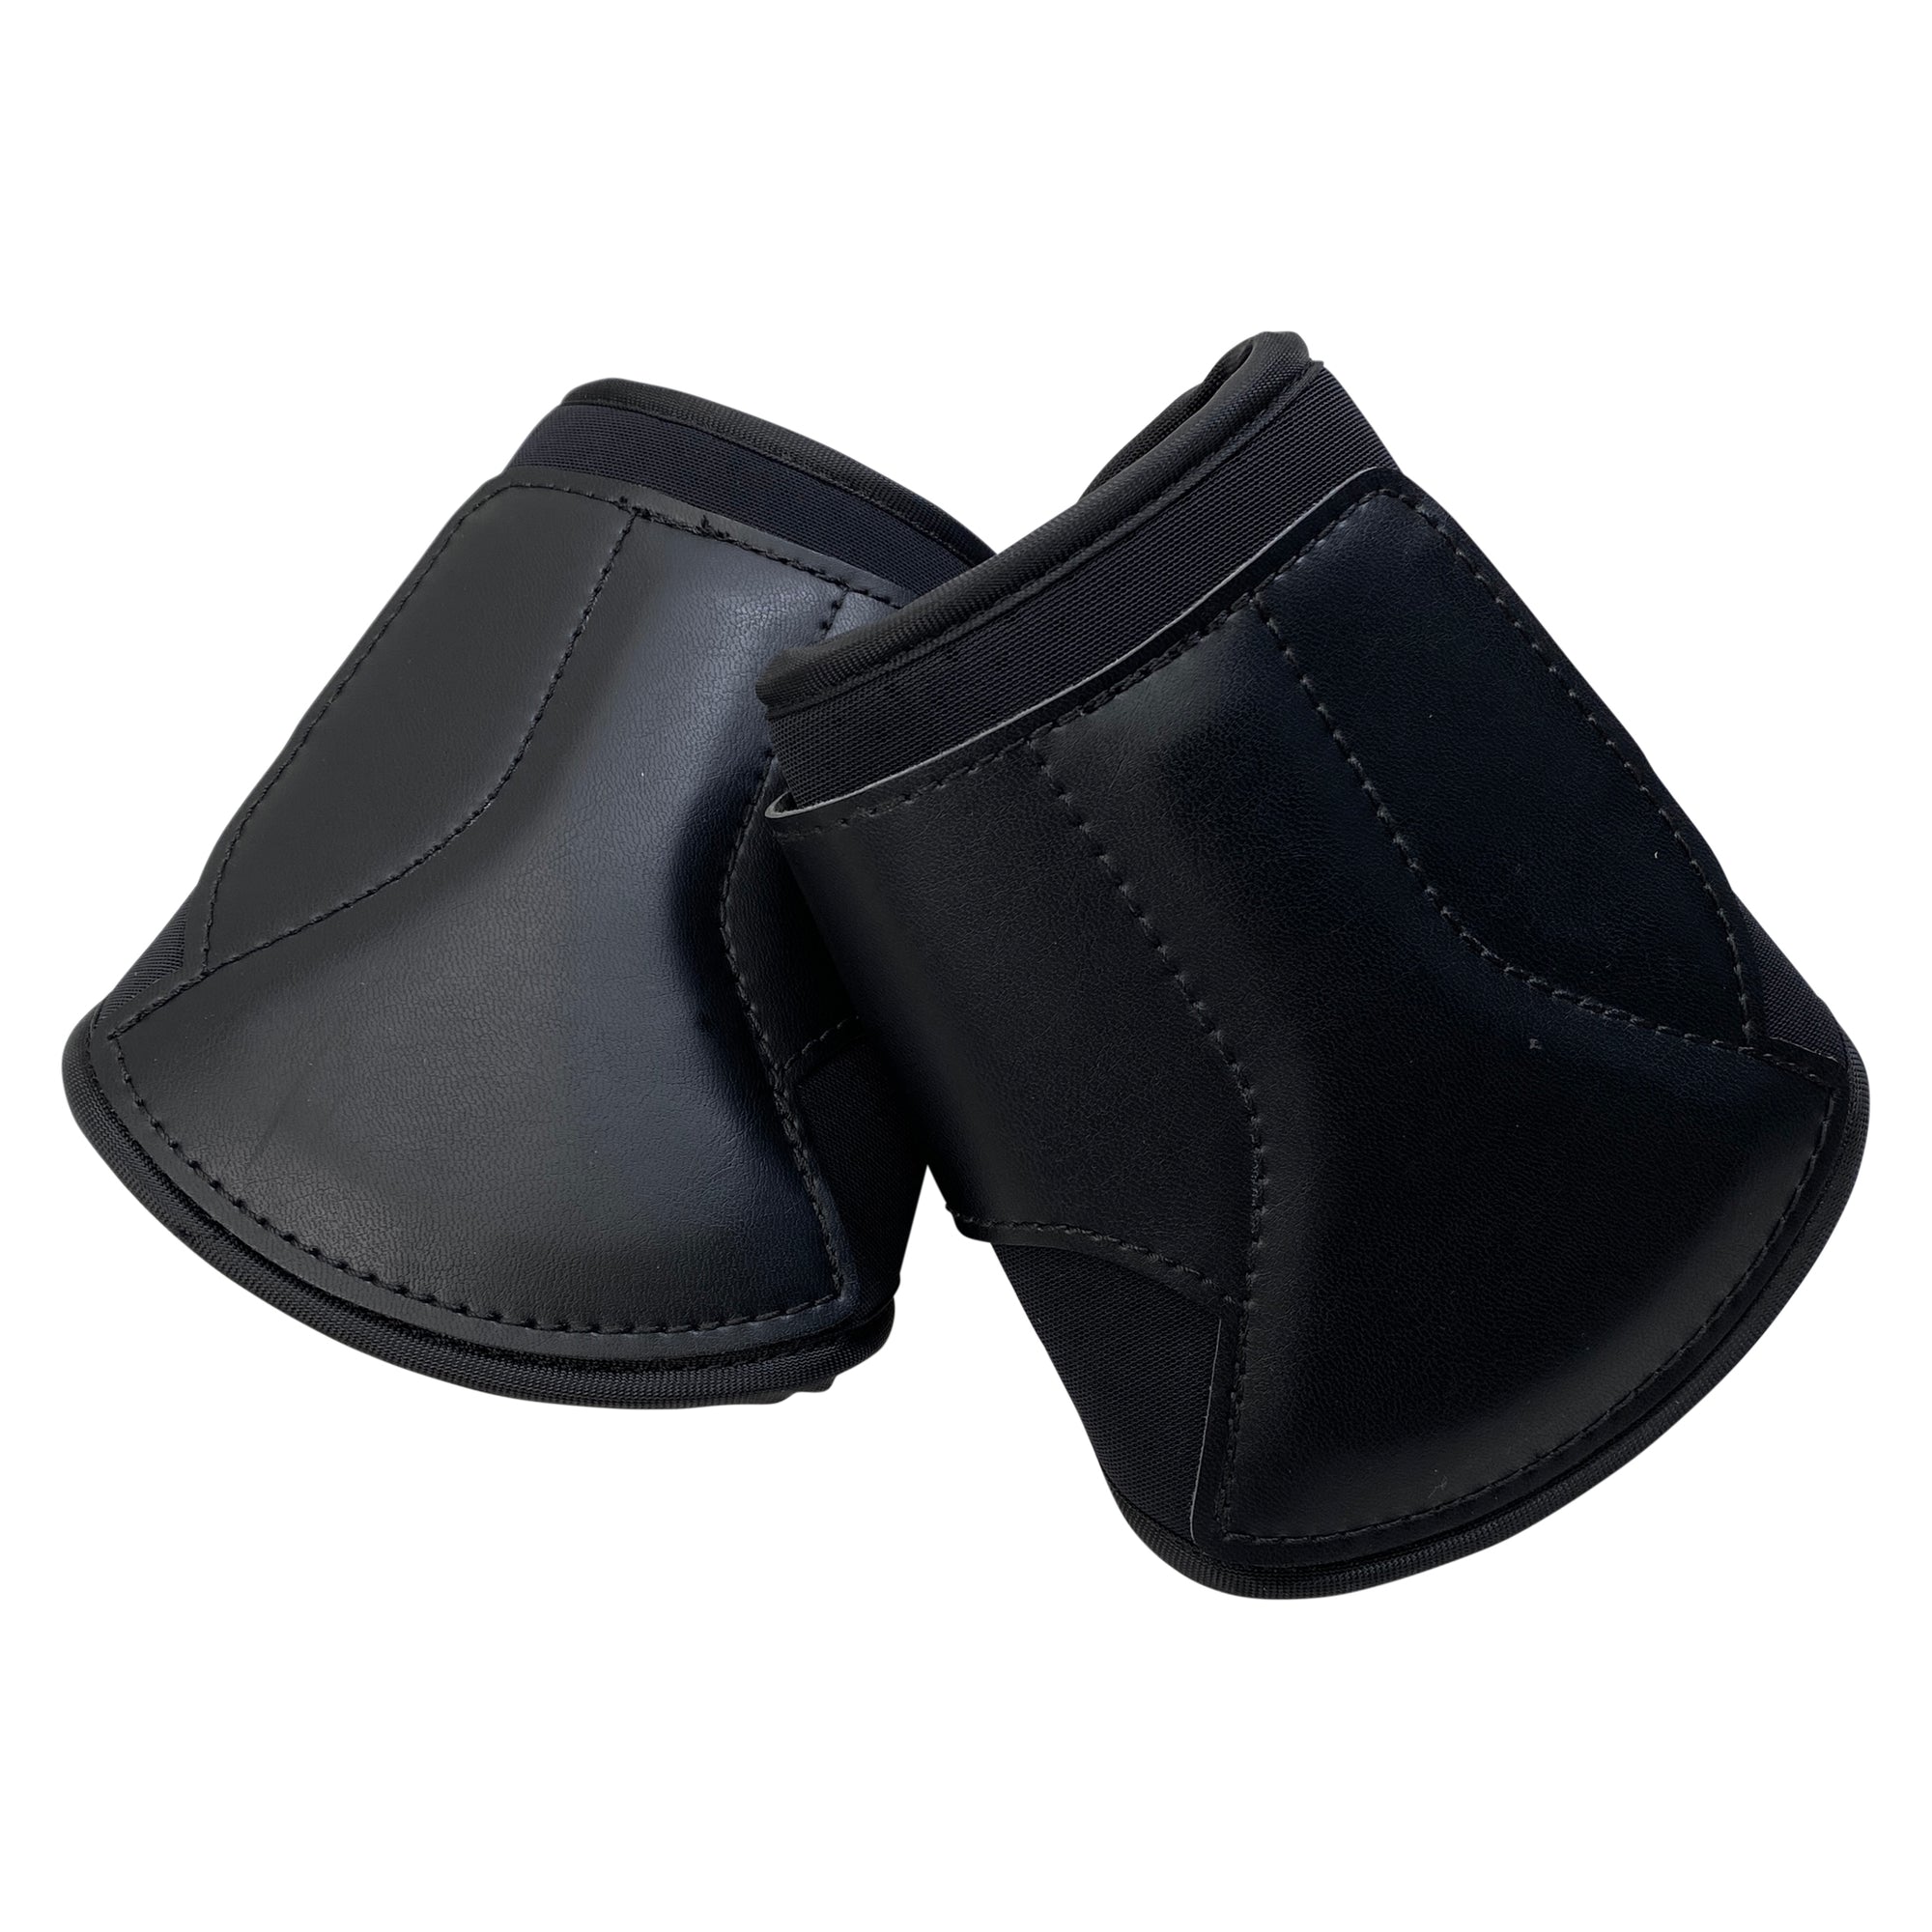 Equifit Essential EveryDay Hind Boots in Black 